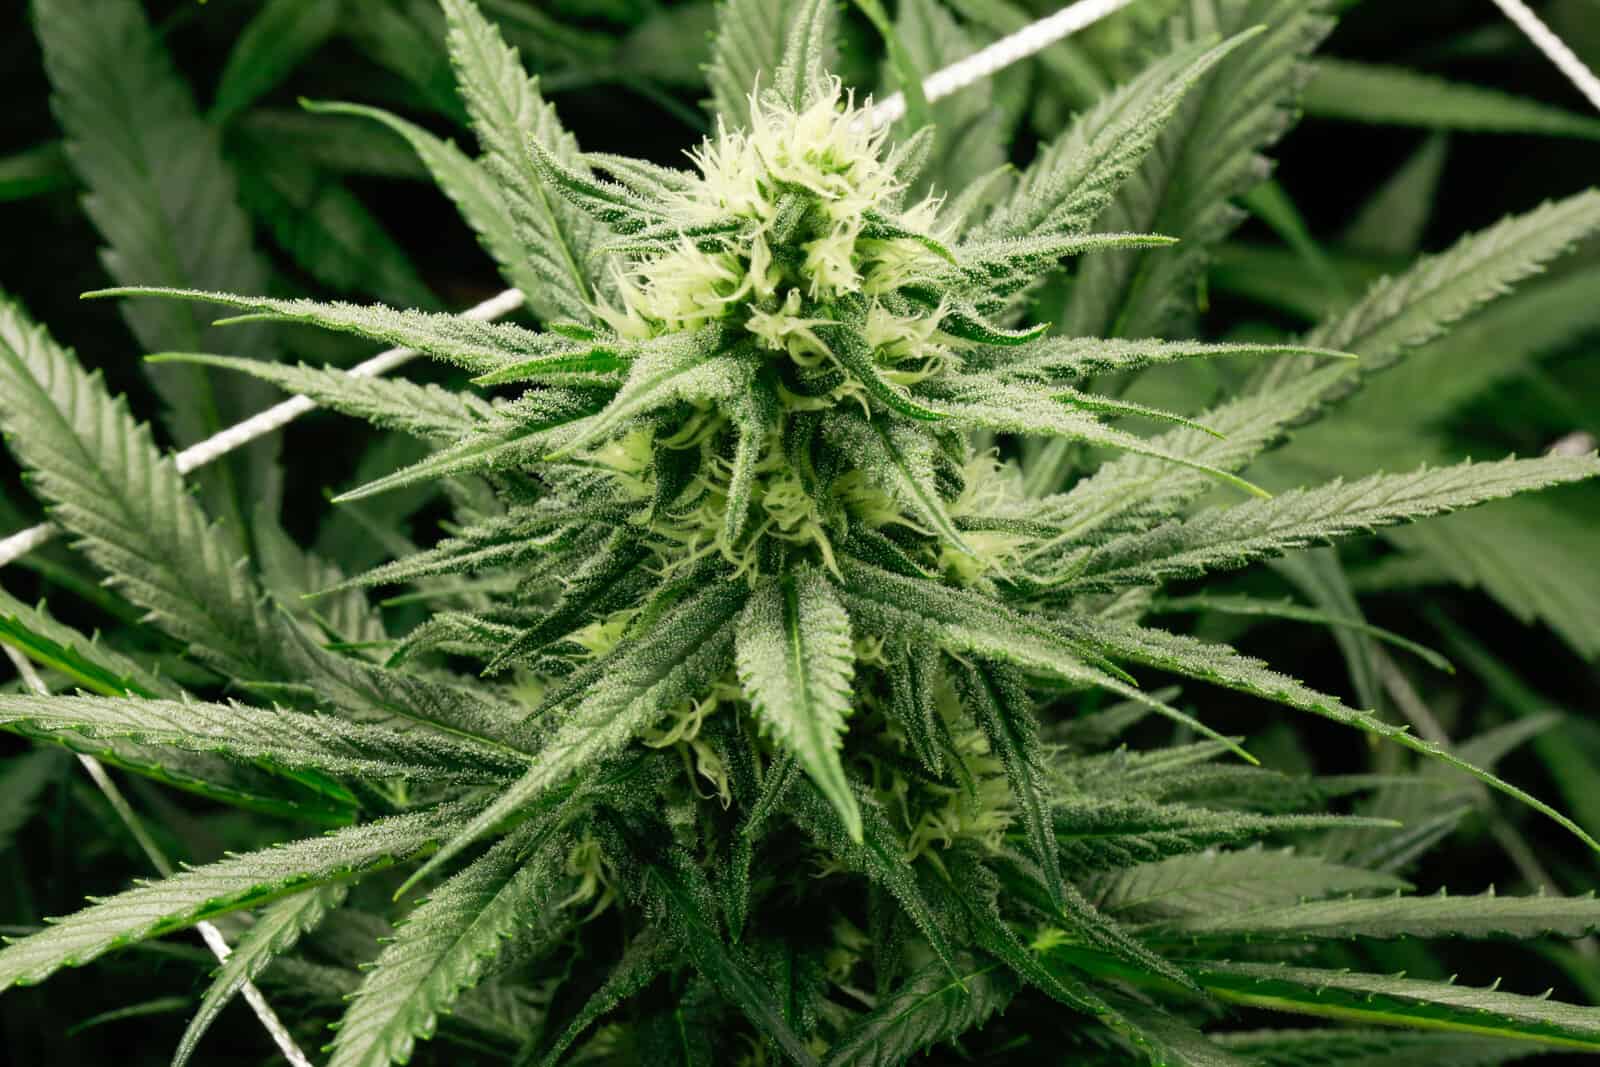 How to Grow Weed: A Brief Overview